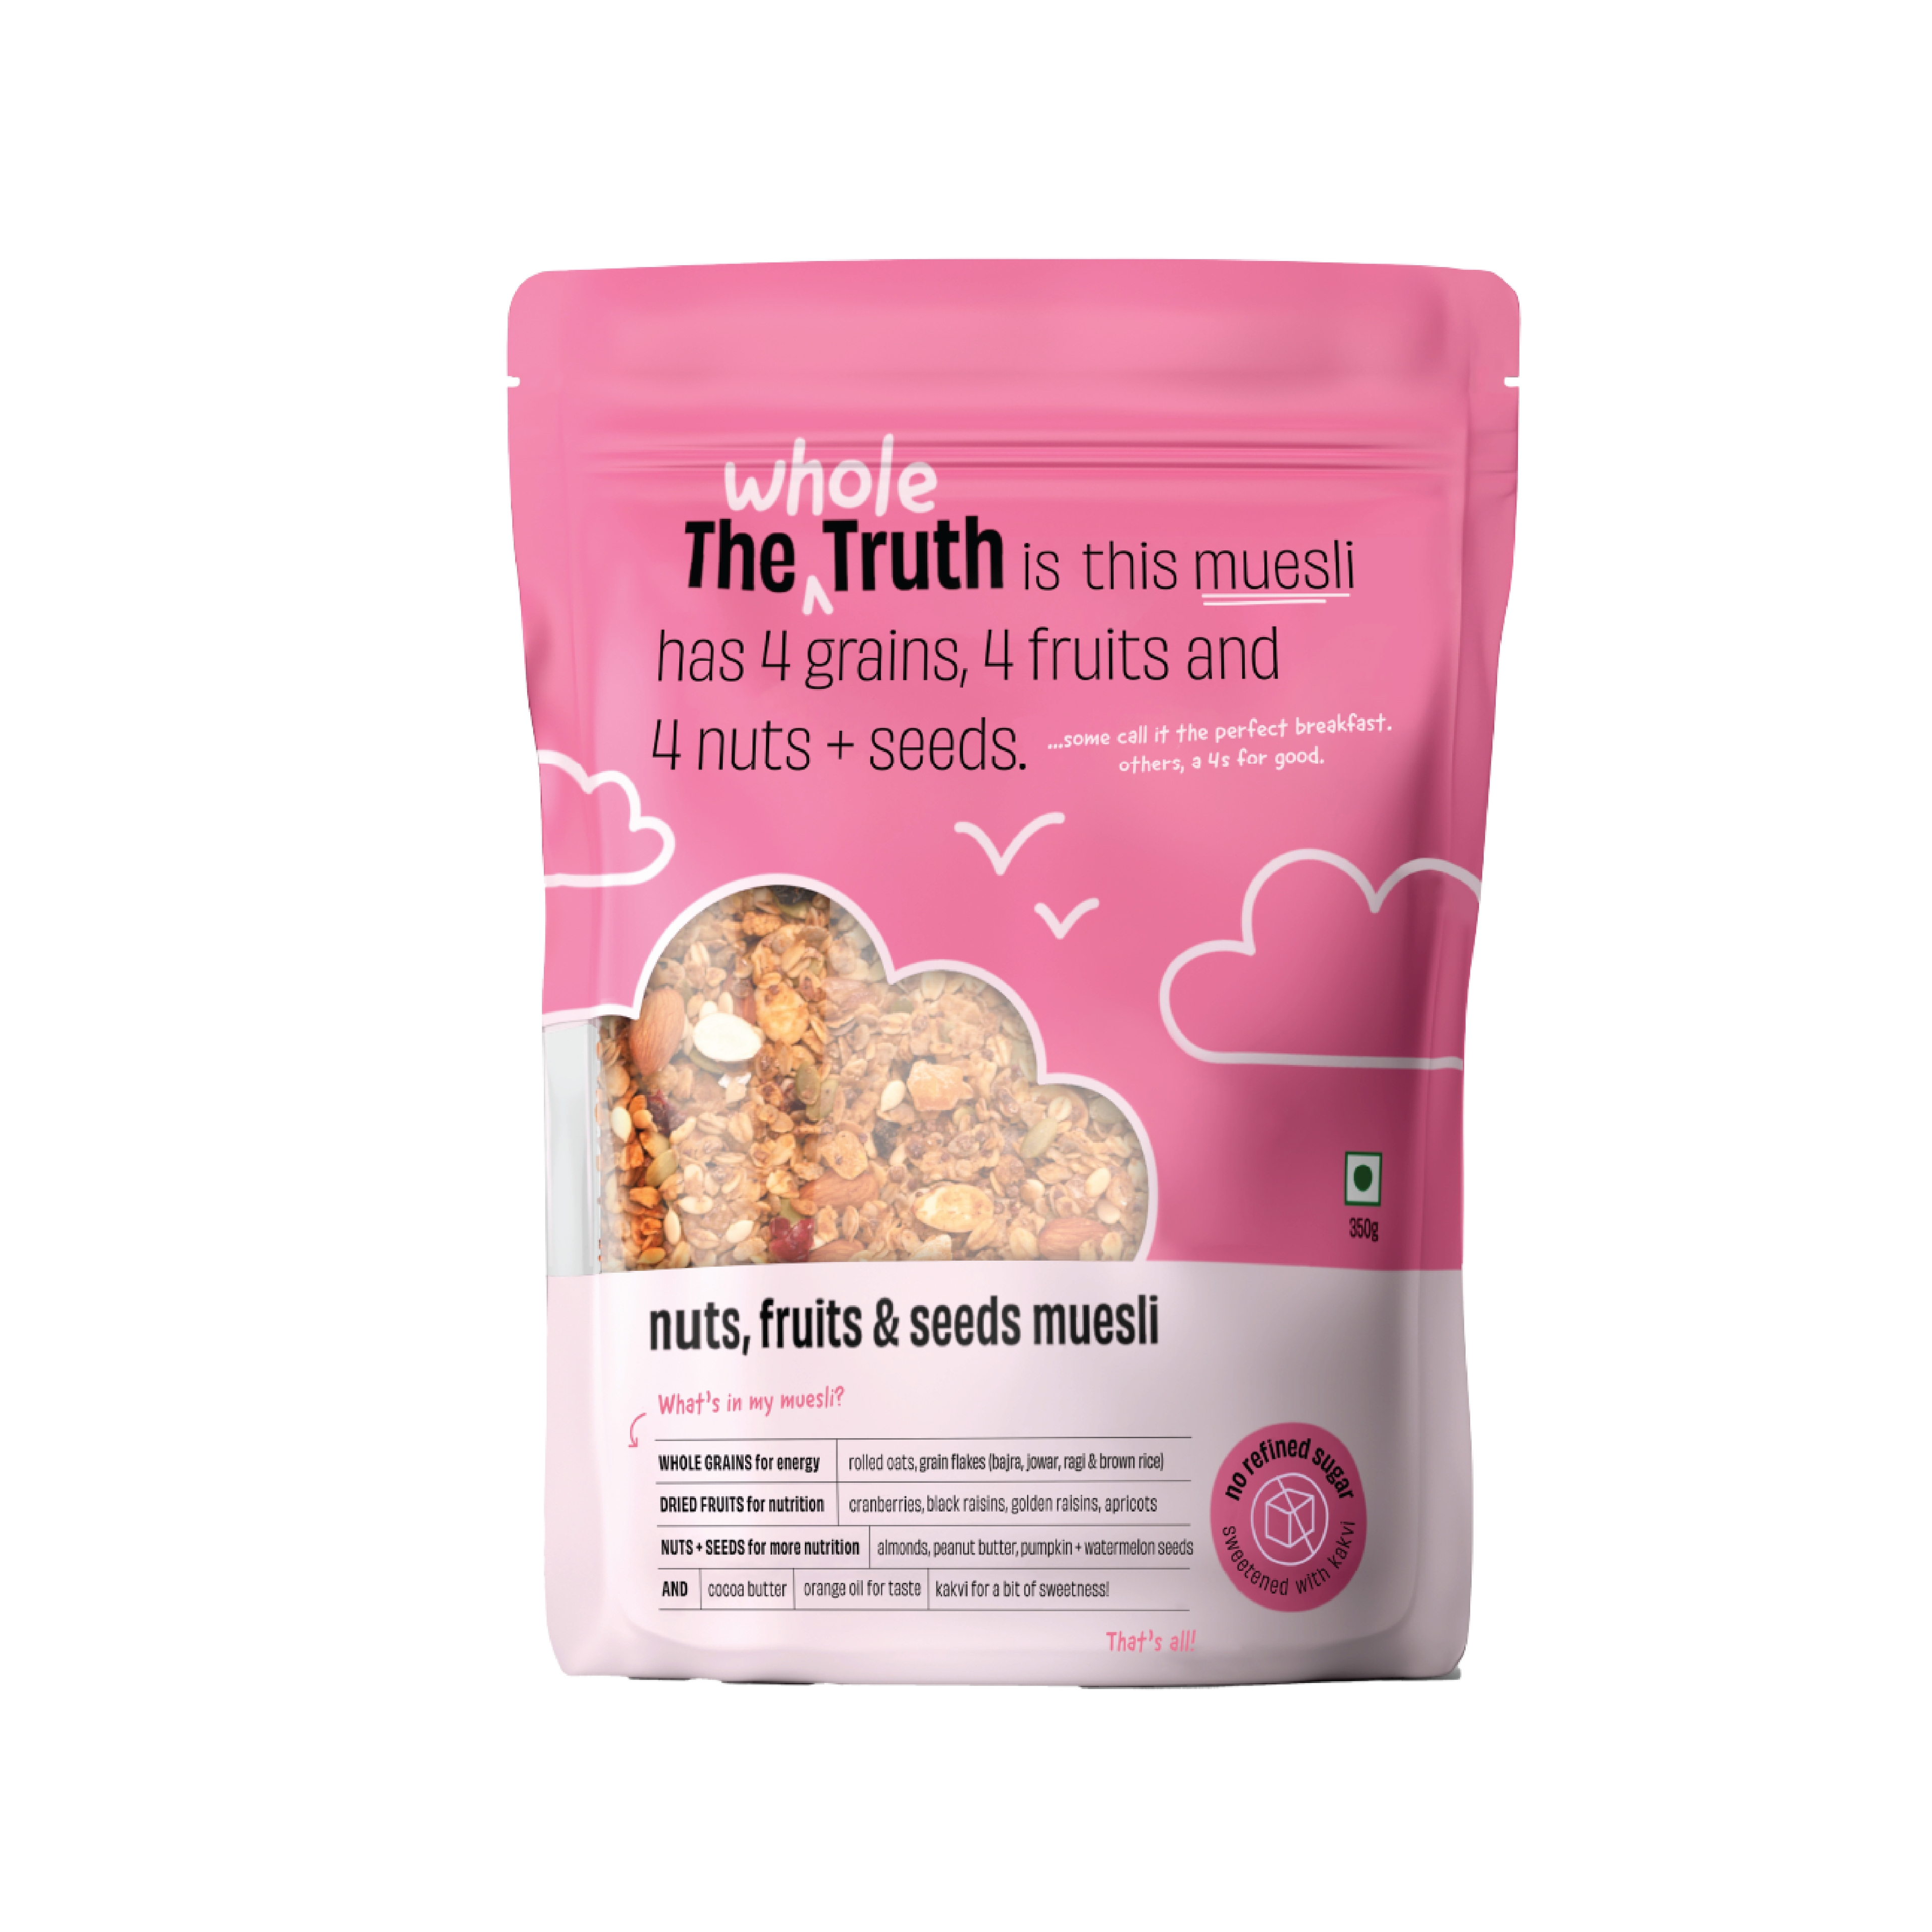 The Whole Truth - Nuts, Fruit n Seeds Muesli 350g